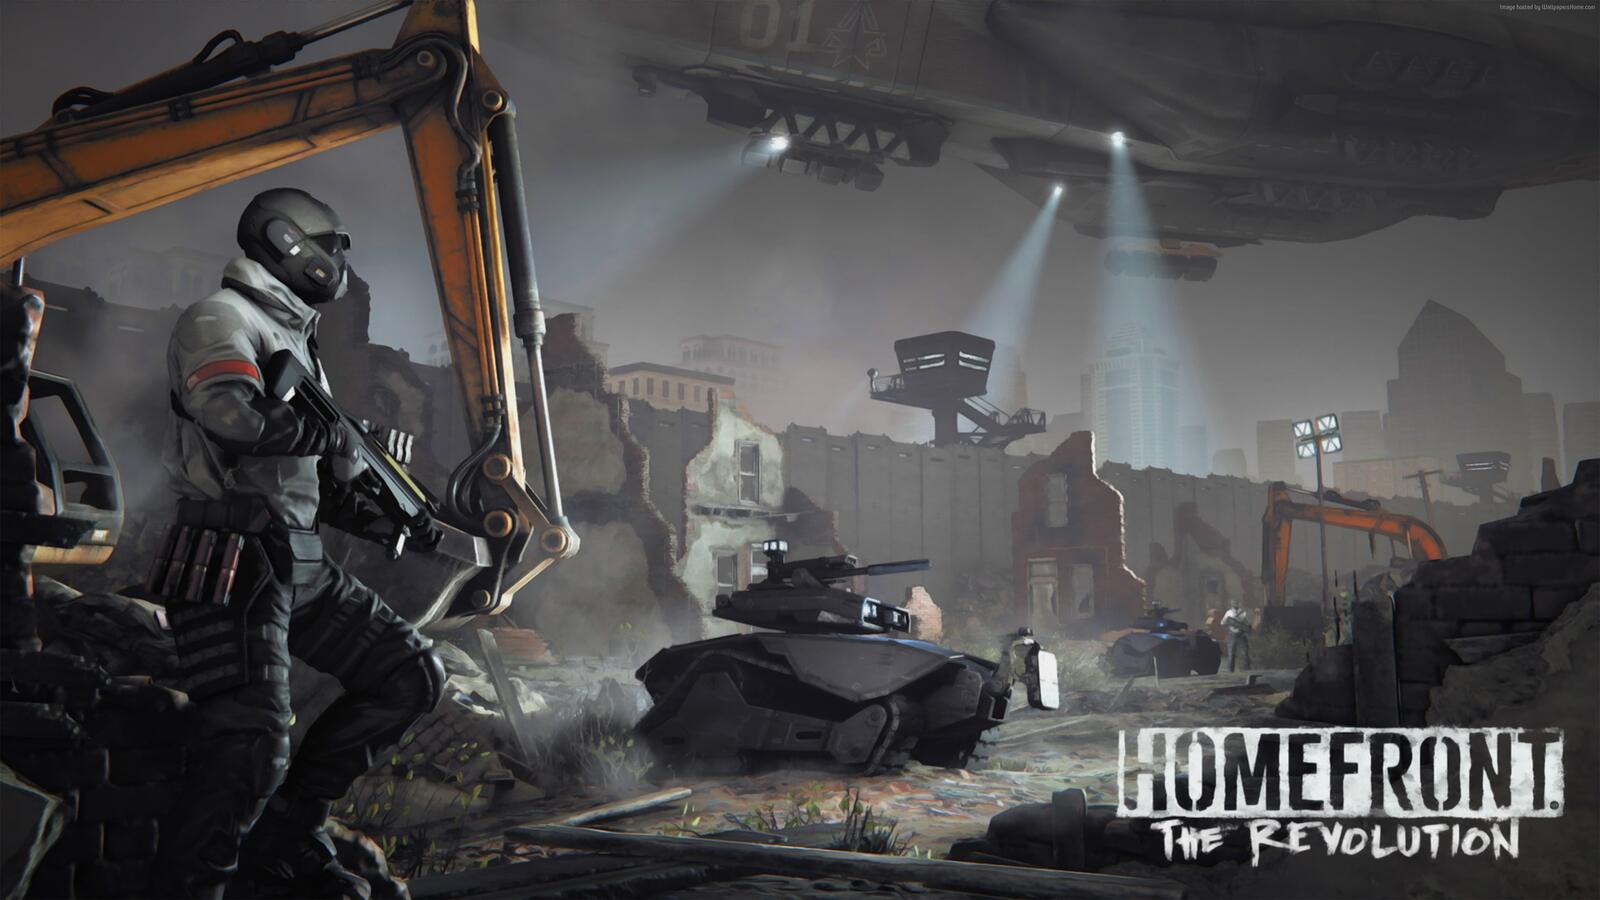 Wallpapers 2016 games homefront the revolution computer games on the desktop